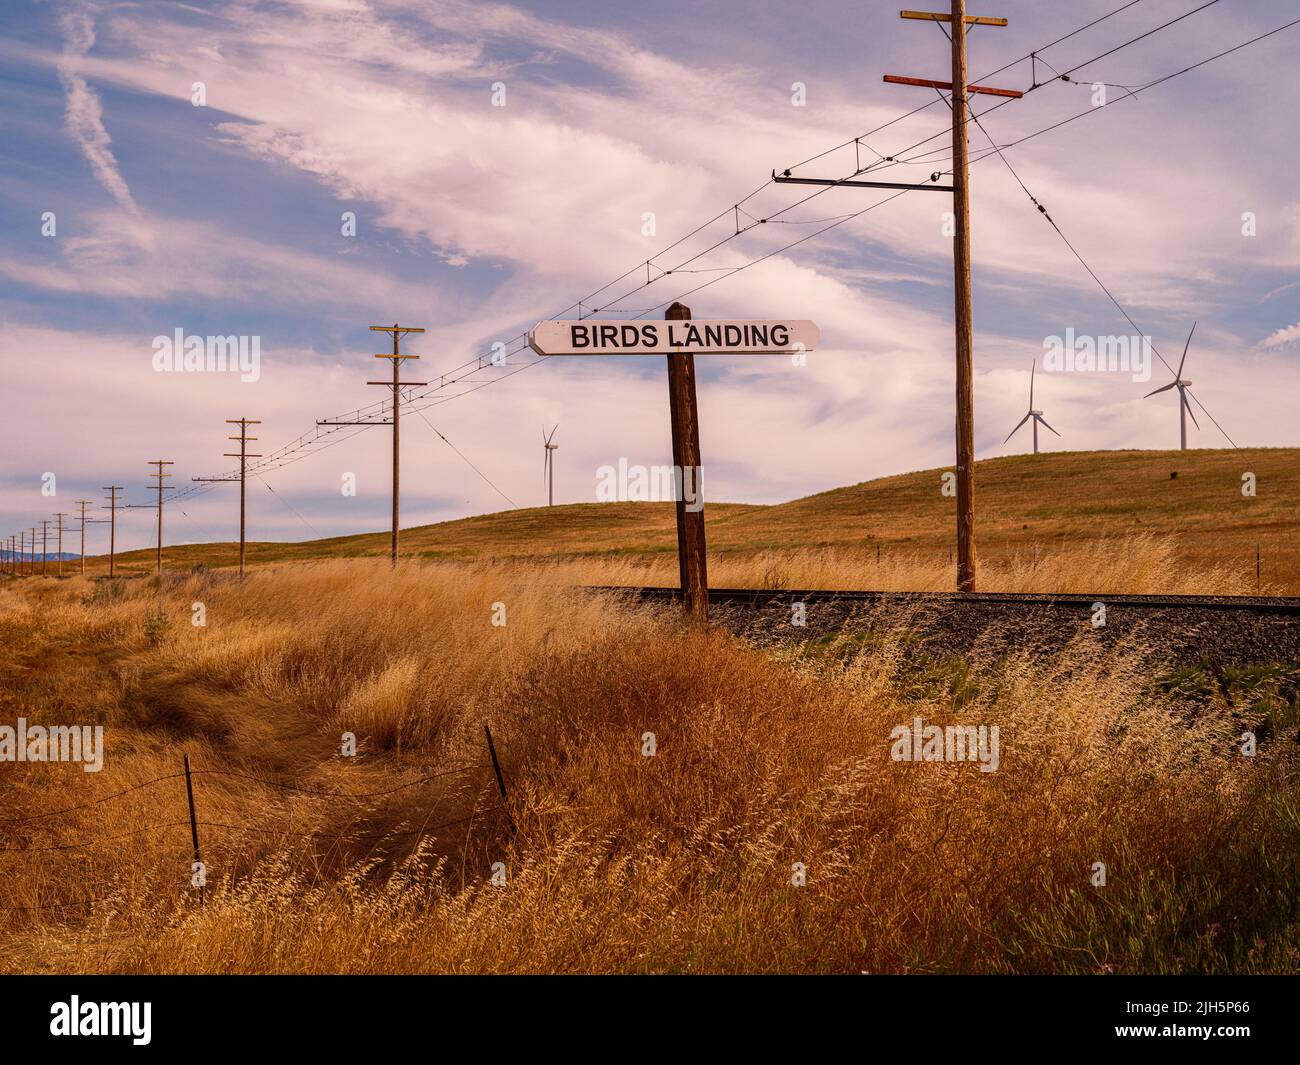 Birds Landing Signage, Solano County, California, with the shiloh wind turbines in the background Stock Photo